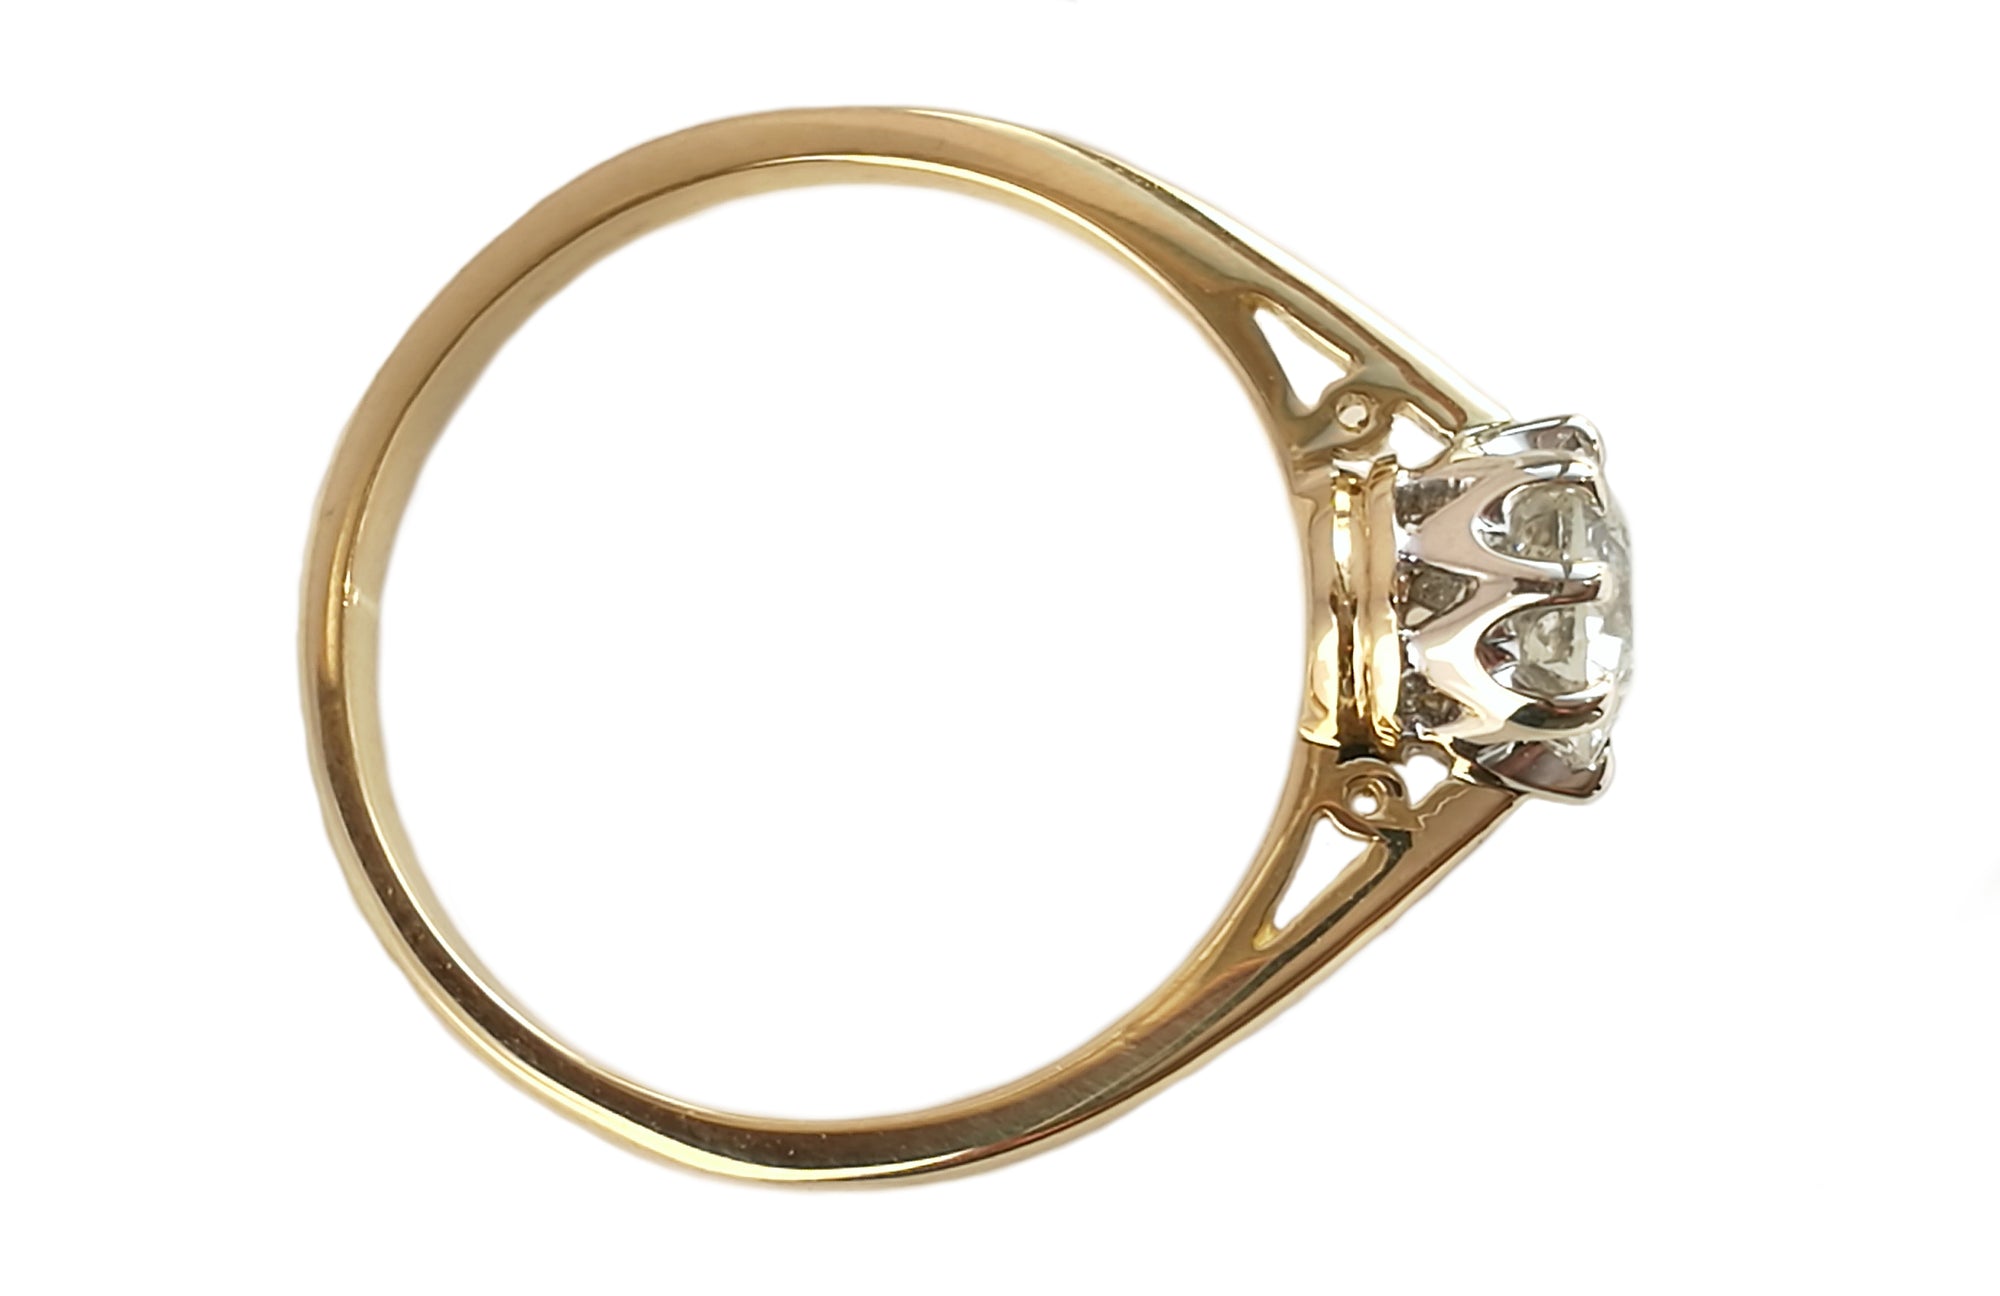 Antique 0.75ct Old Cut Round Diamond Engagement Ring in 18k Gold